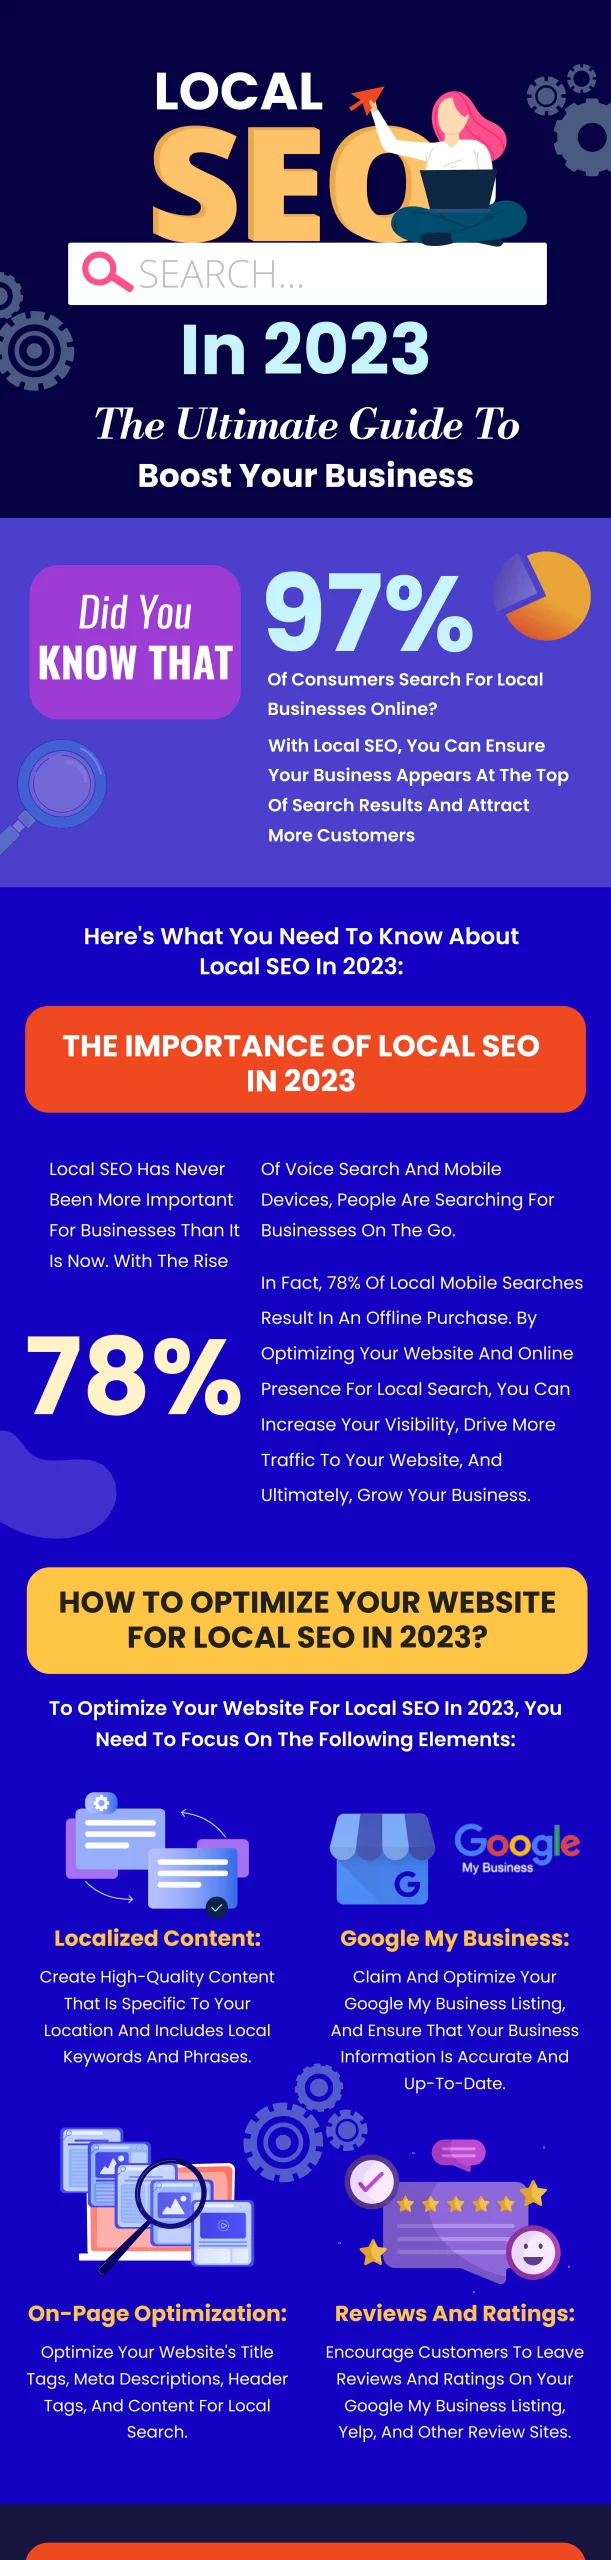 Local SEO in 2023 : The Ultimate Guide to Boost Your Business